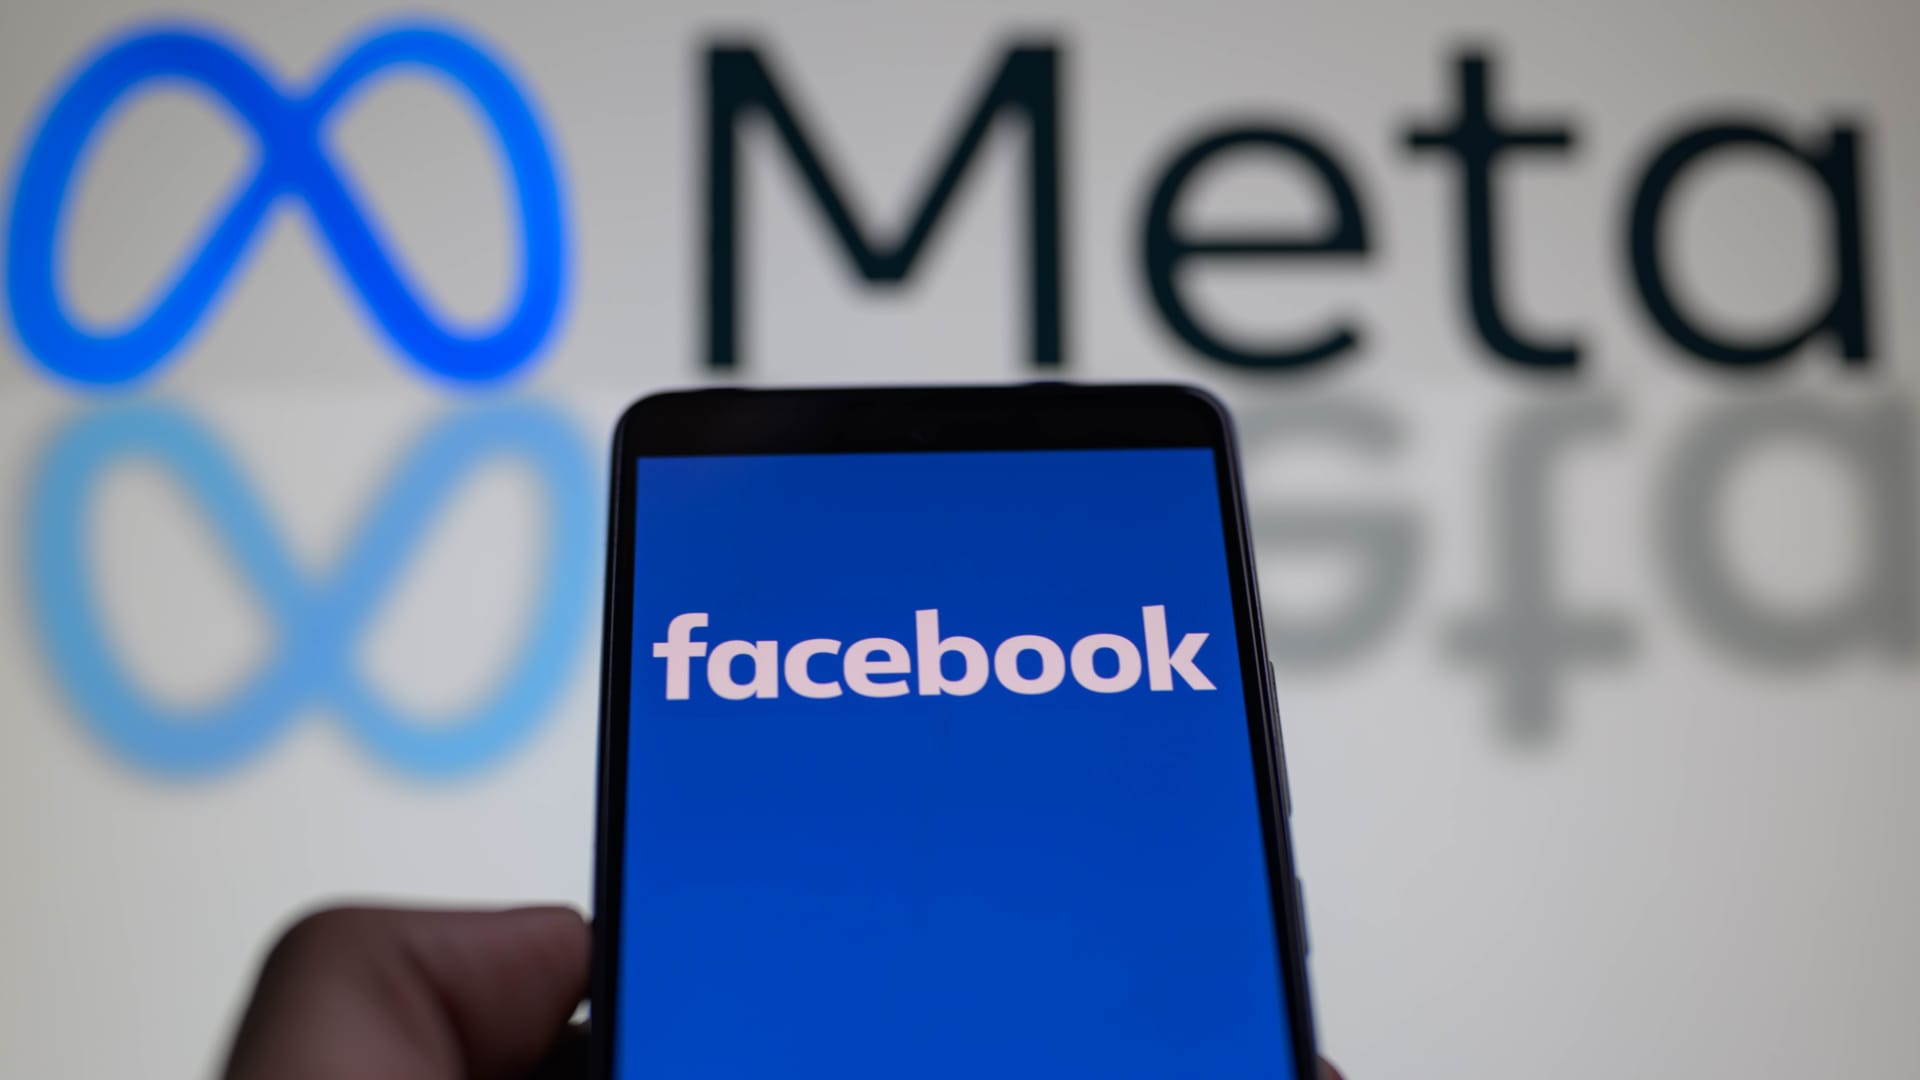 A smartphone is displaying Facebook with the Meta icon visible in the background.